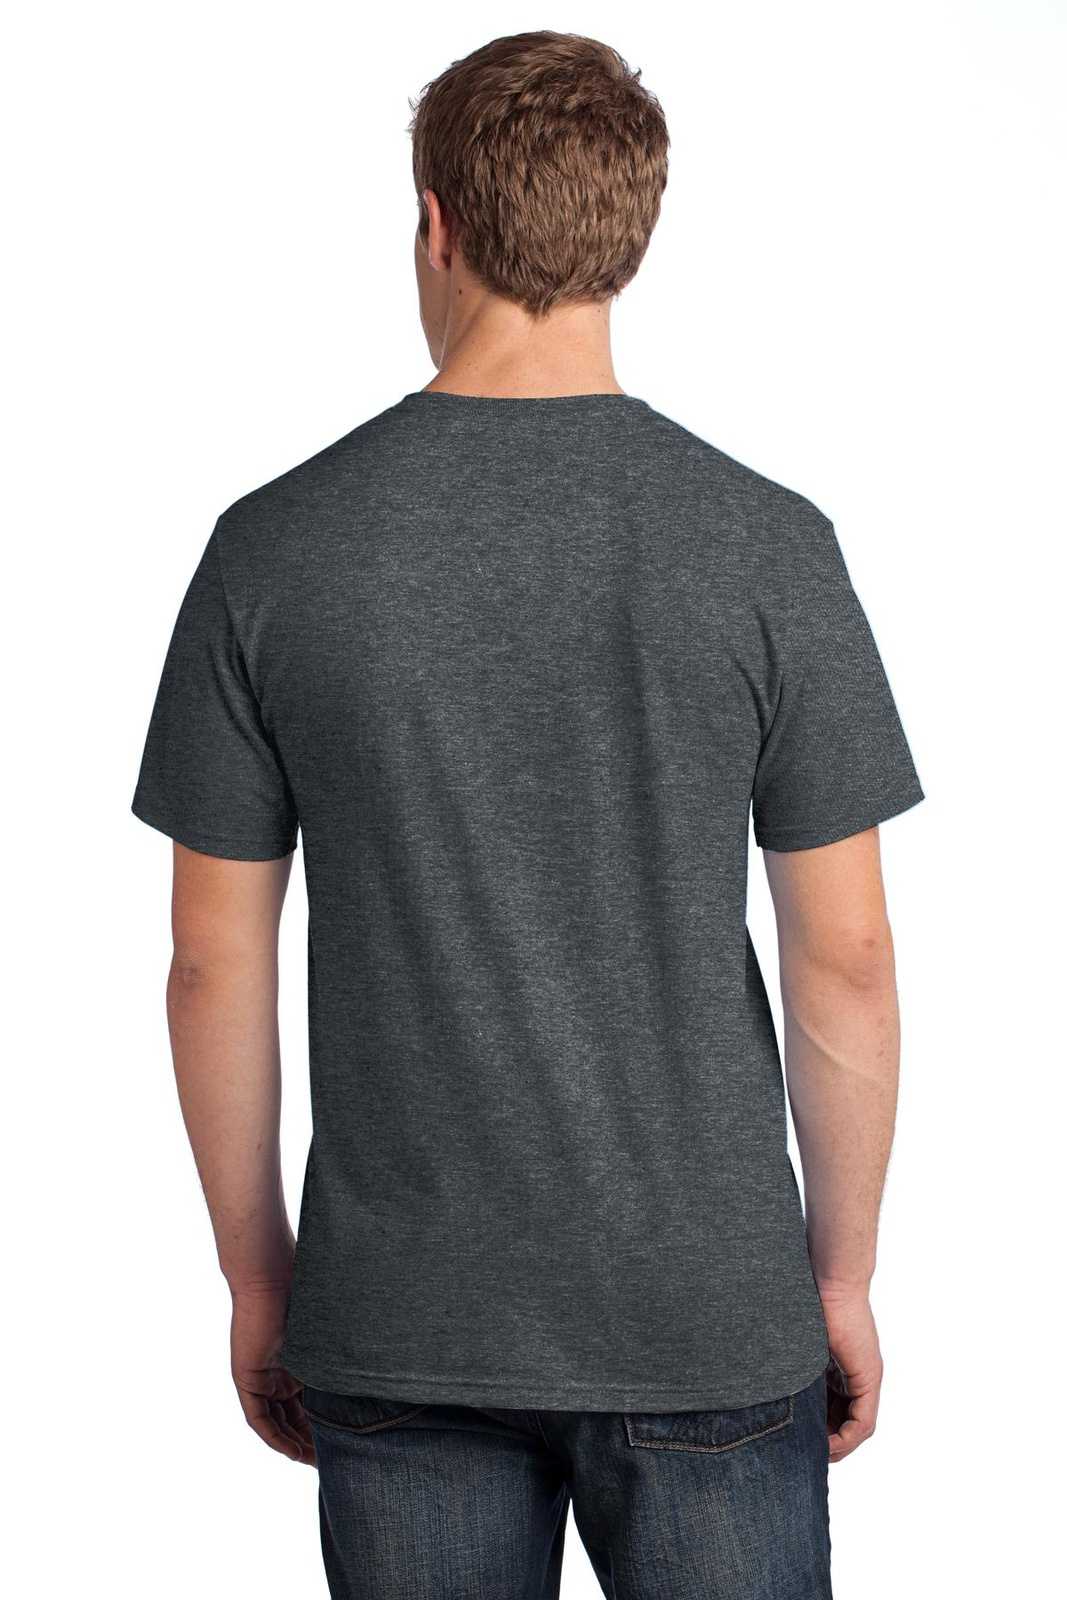 Fruit of the Loom 3930 HD Cotton 100% Cotton T-Shirt - Black Heather - HIT a Double